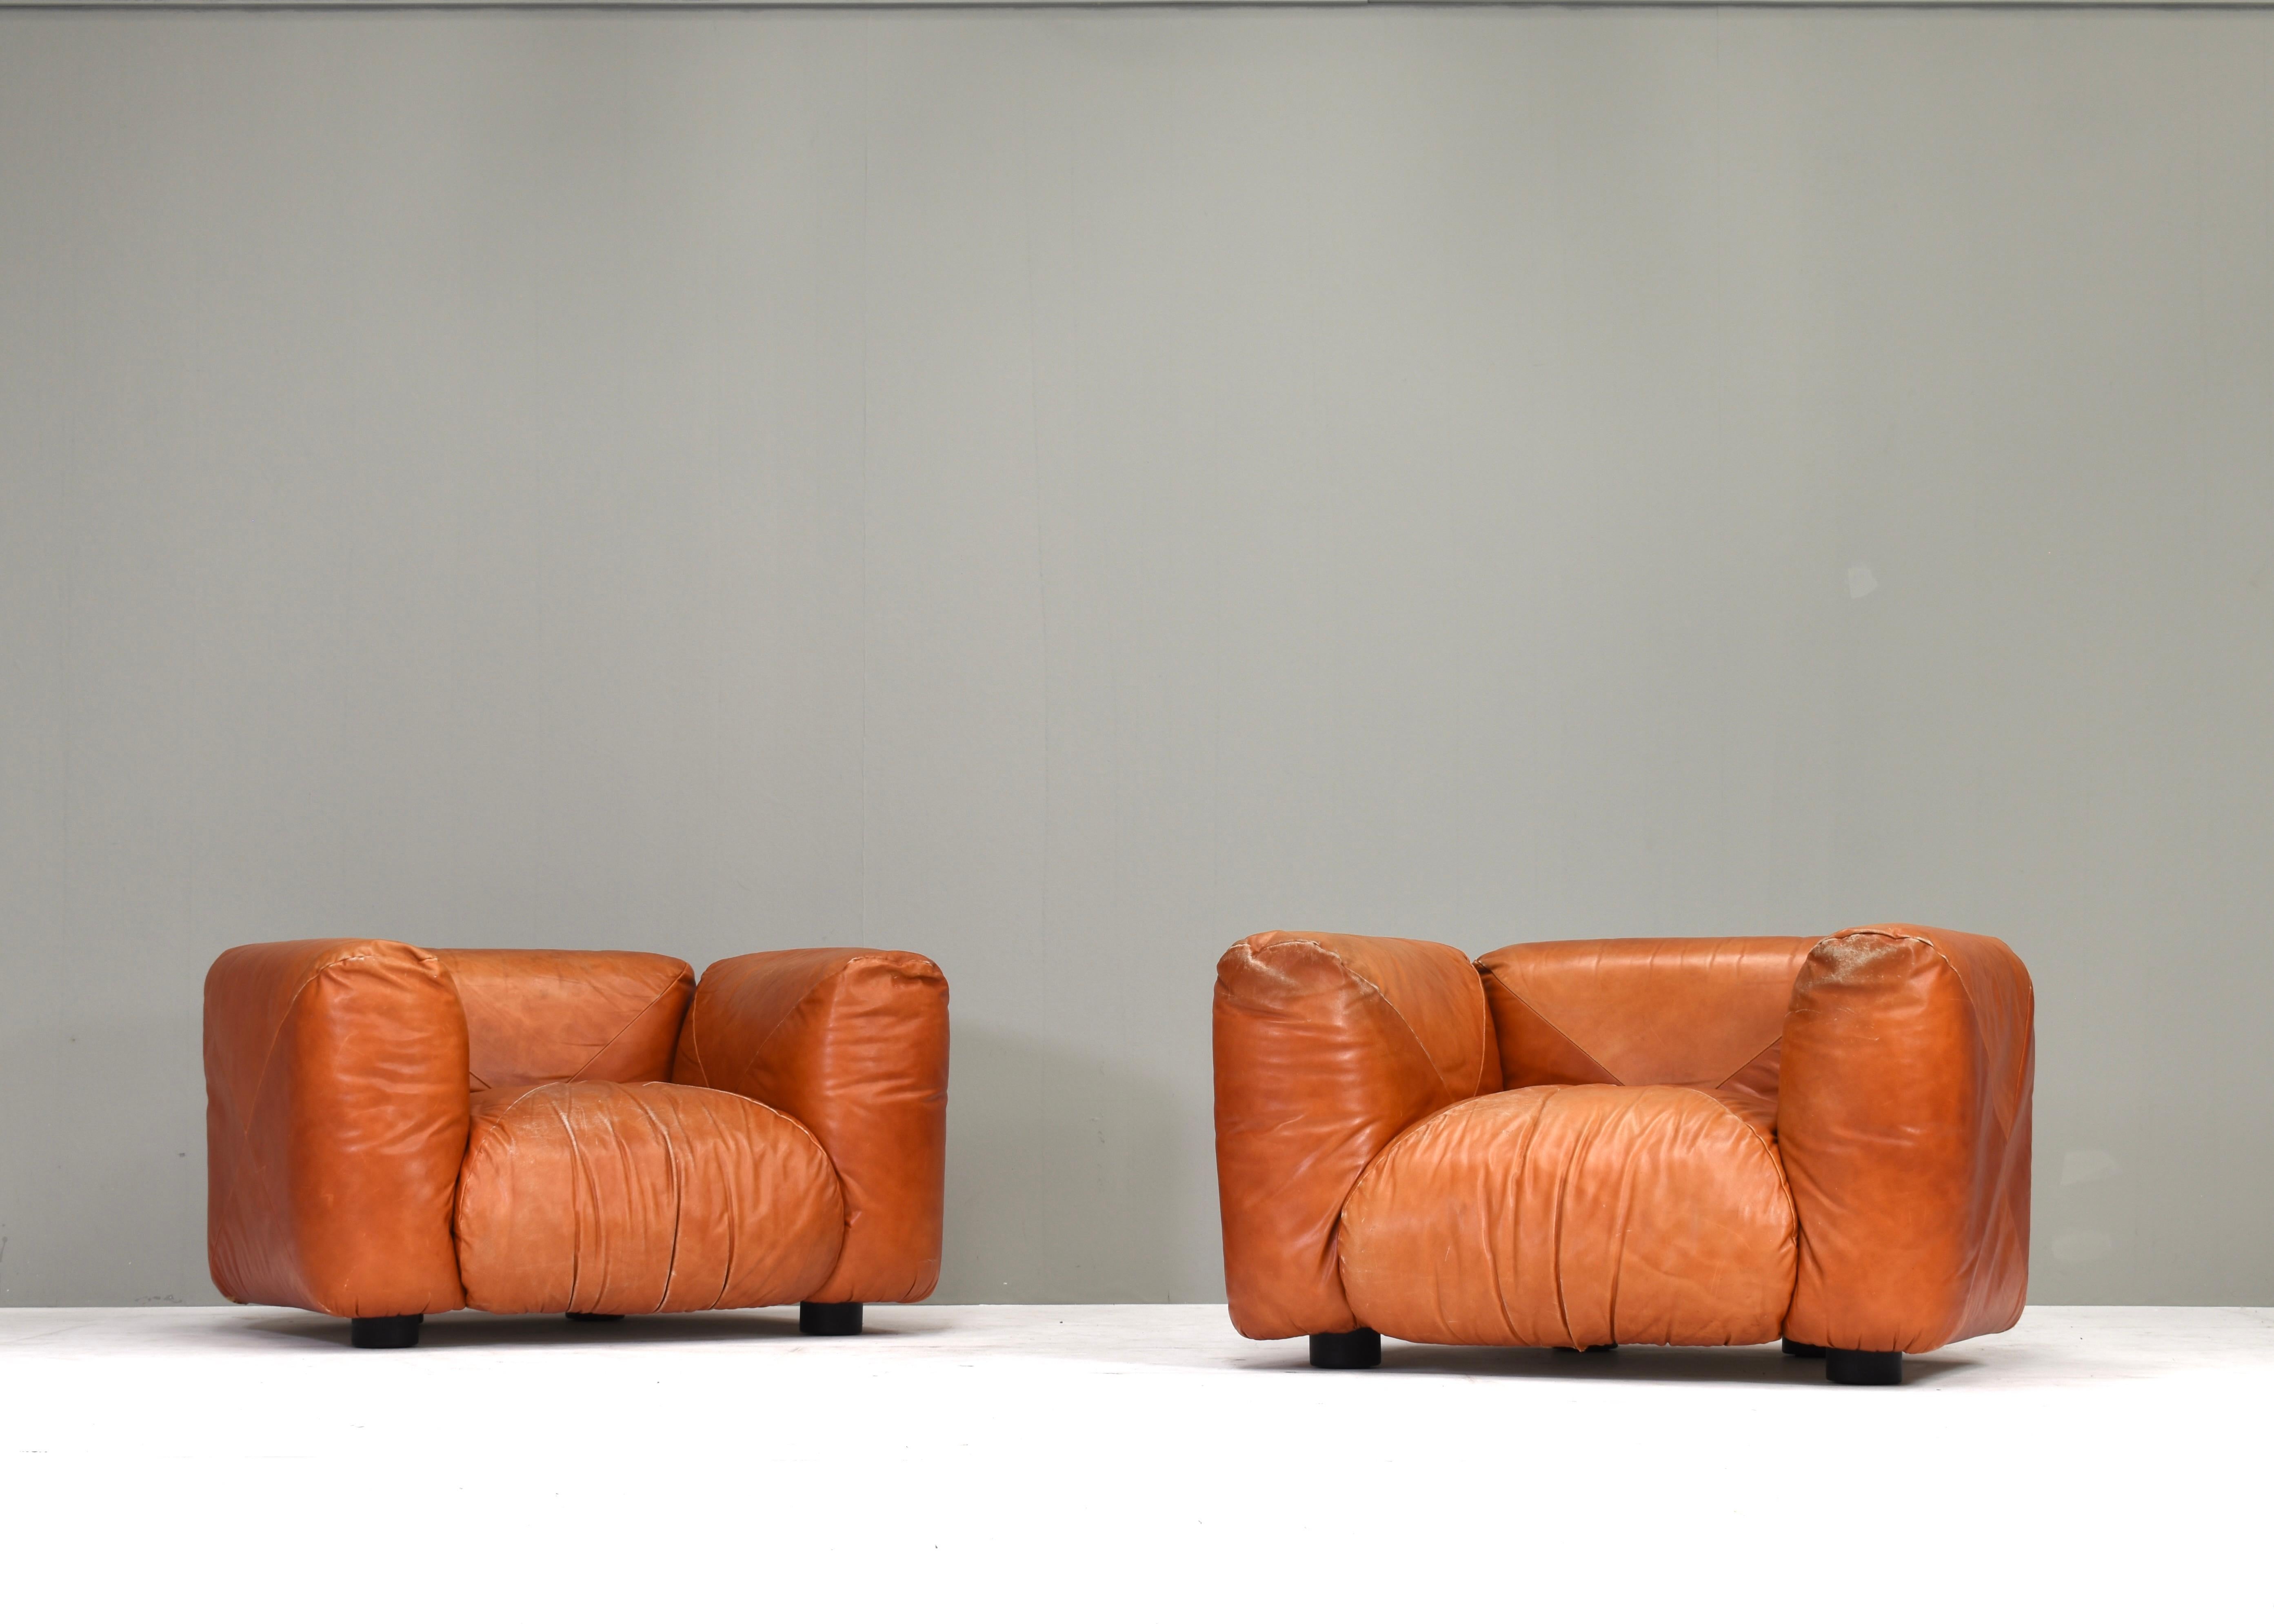 The Marius&Marius lounge chairs and sofa were designed by the Italian architect and designer Mario Marenco in 1970. He is known for distinctive and innovative designs, featuring large, plush cushions that appear to float on a lightweight, flexible